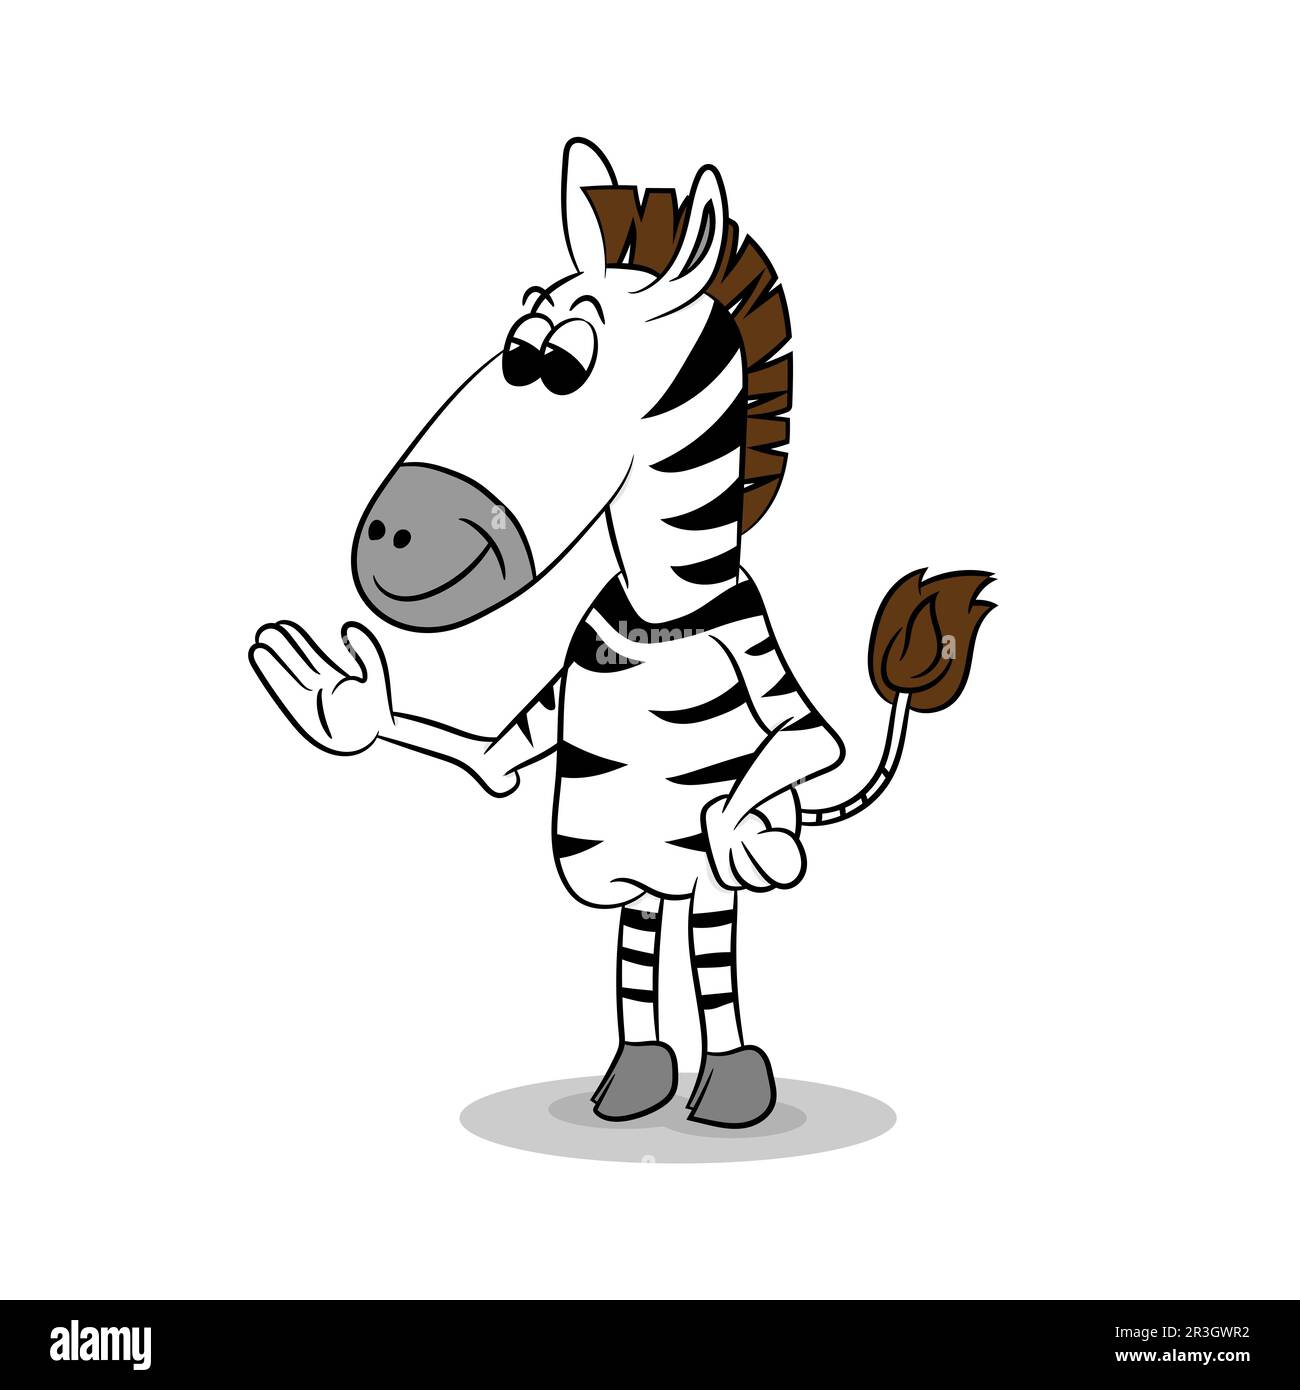 Cute cartoon zebra with a waving hand on a white background, vector illustration Stock Photo